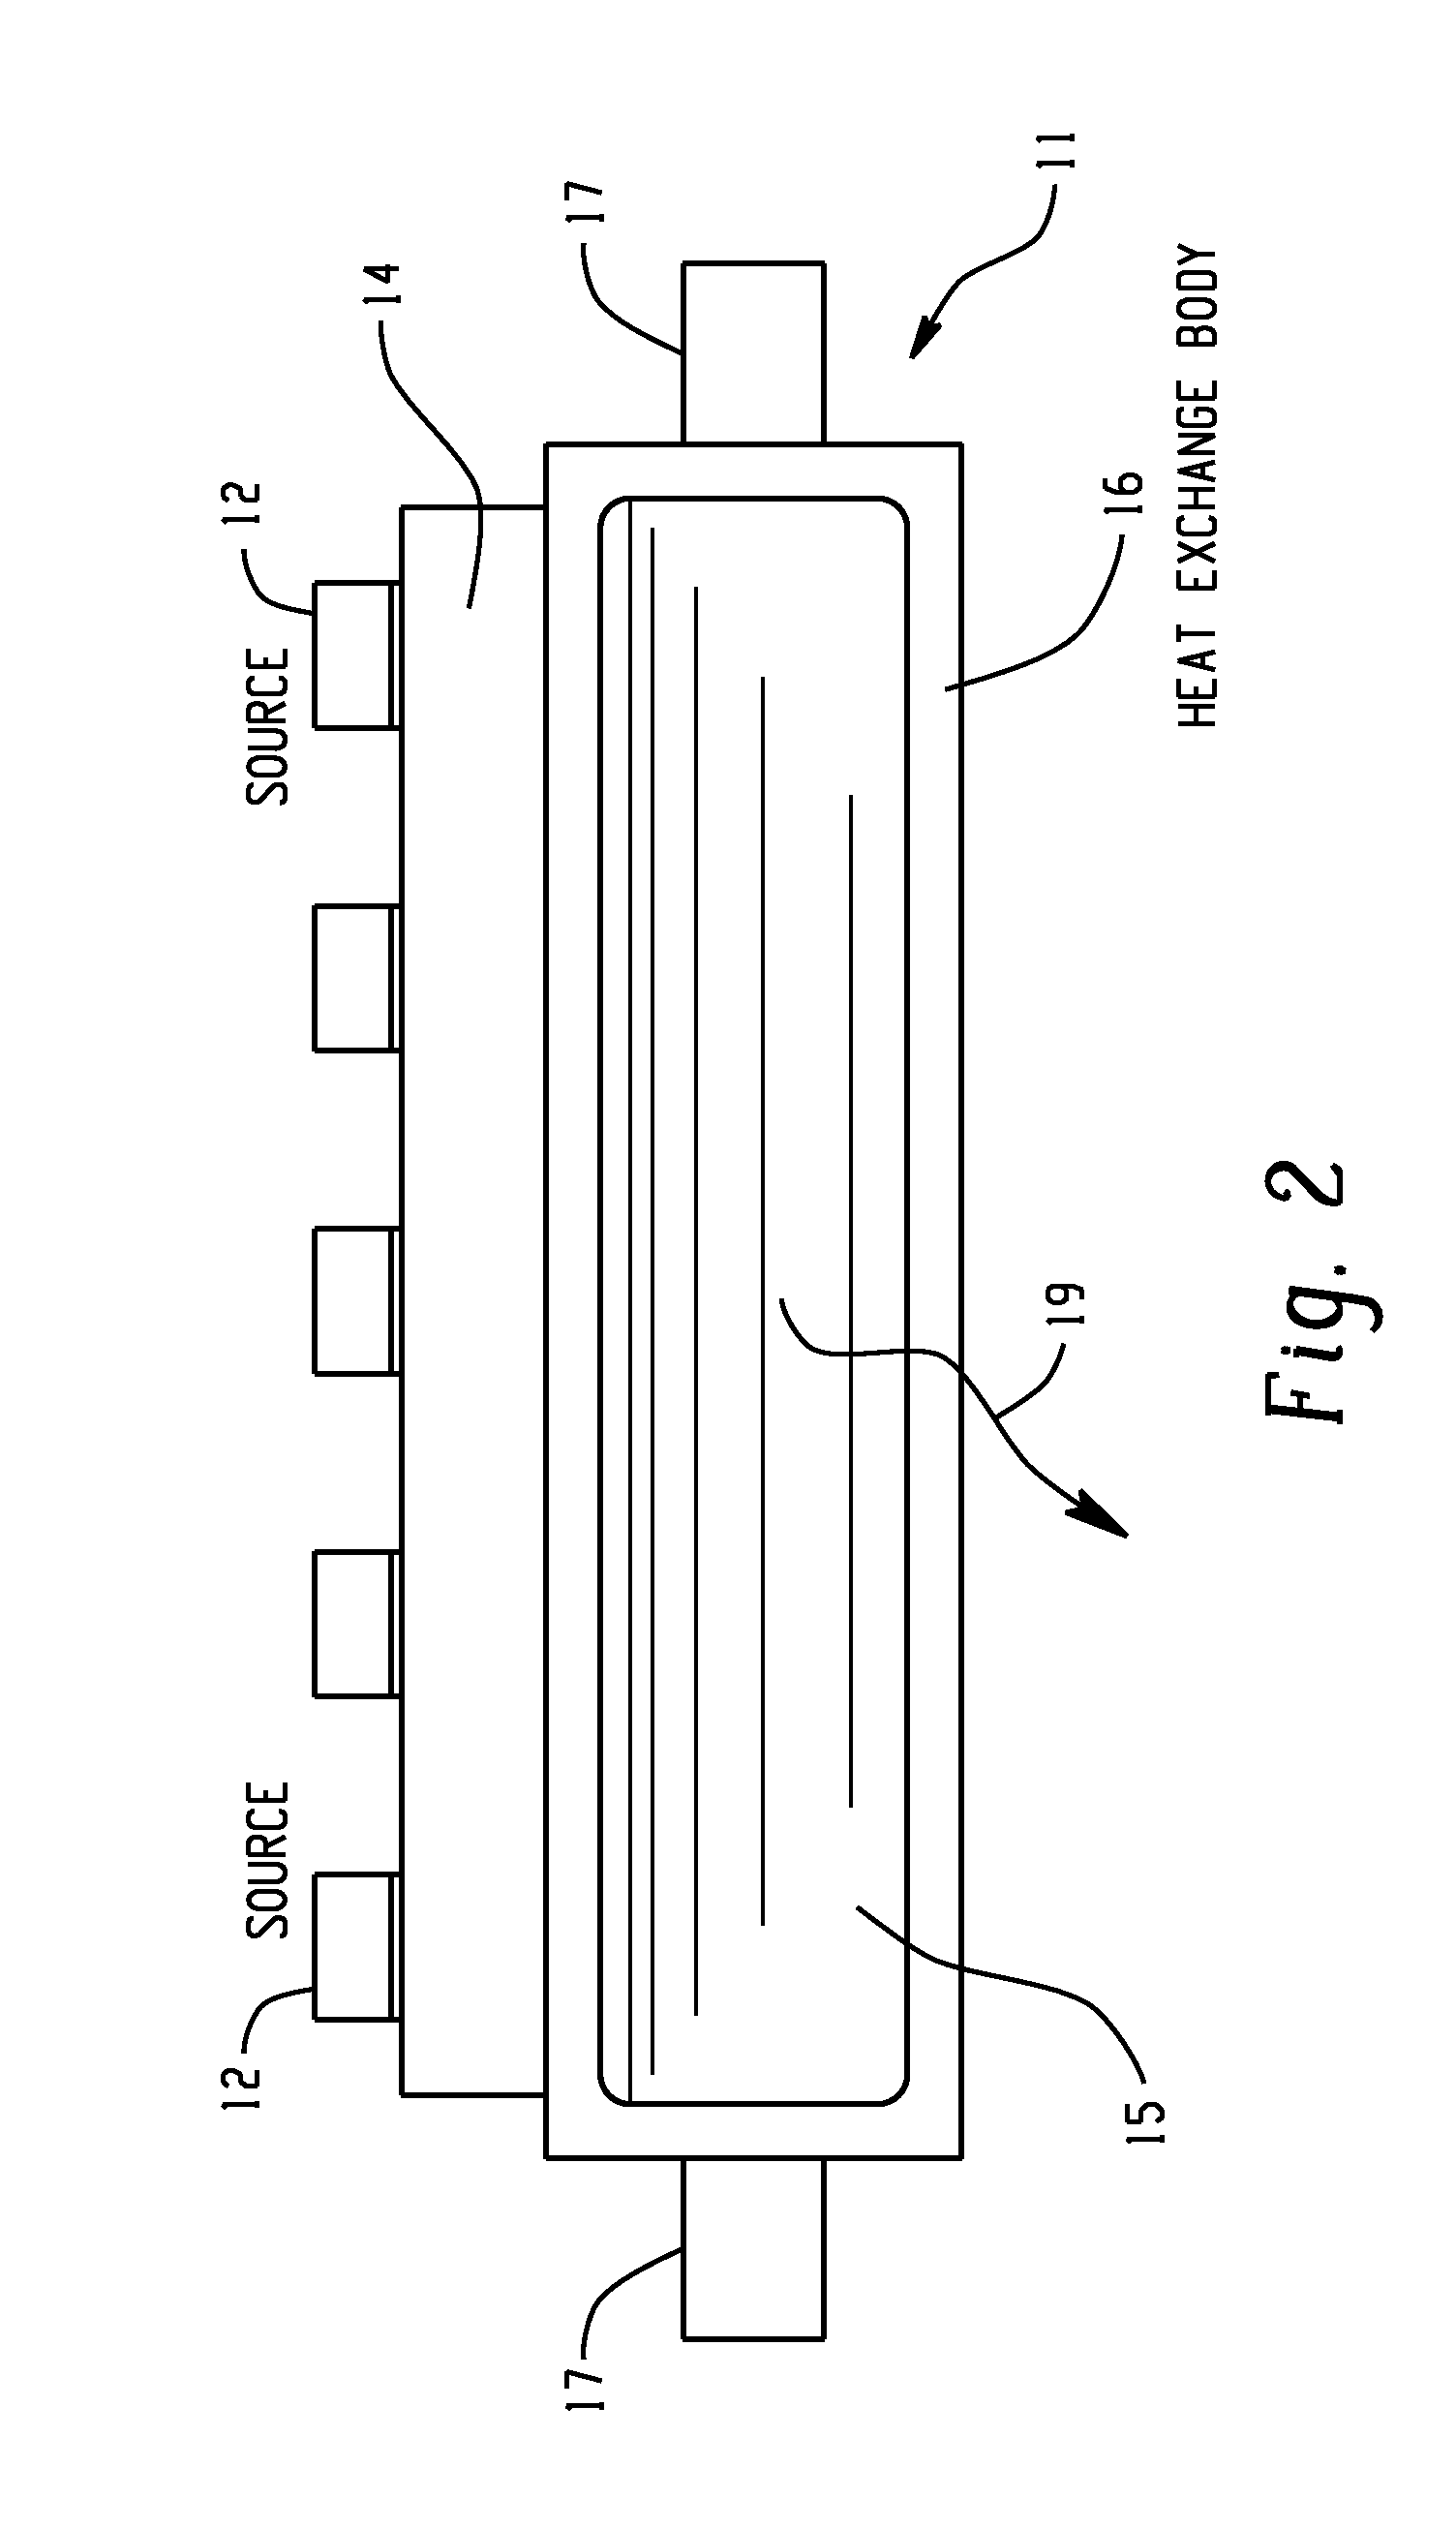 Distributed cooling of arrayed semi-conductor radiation emitting devices